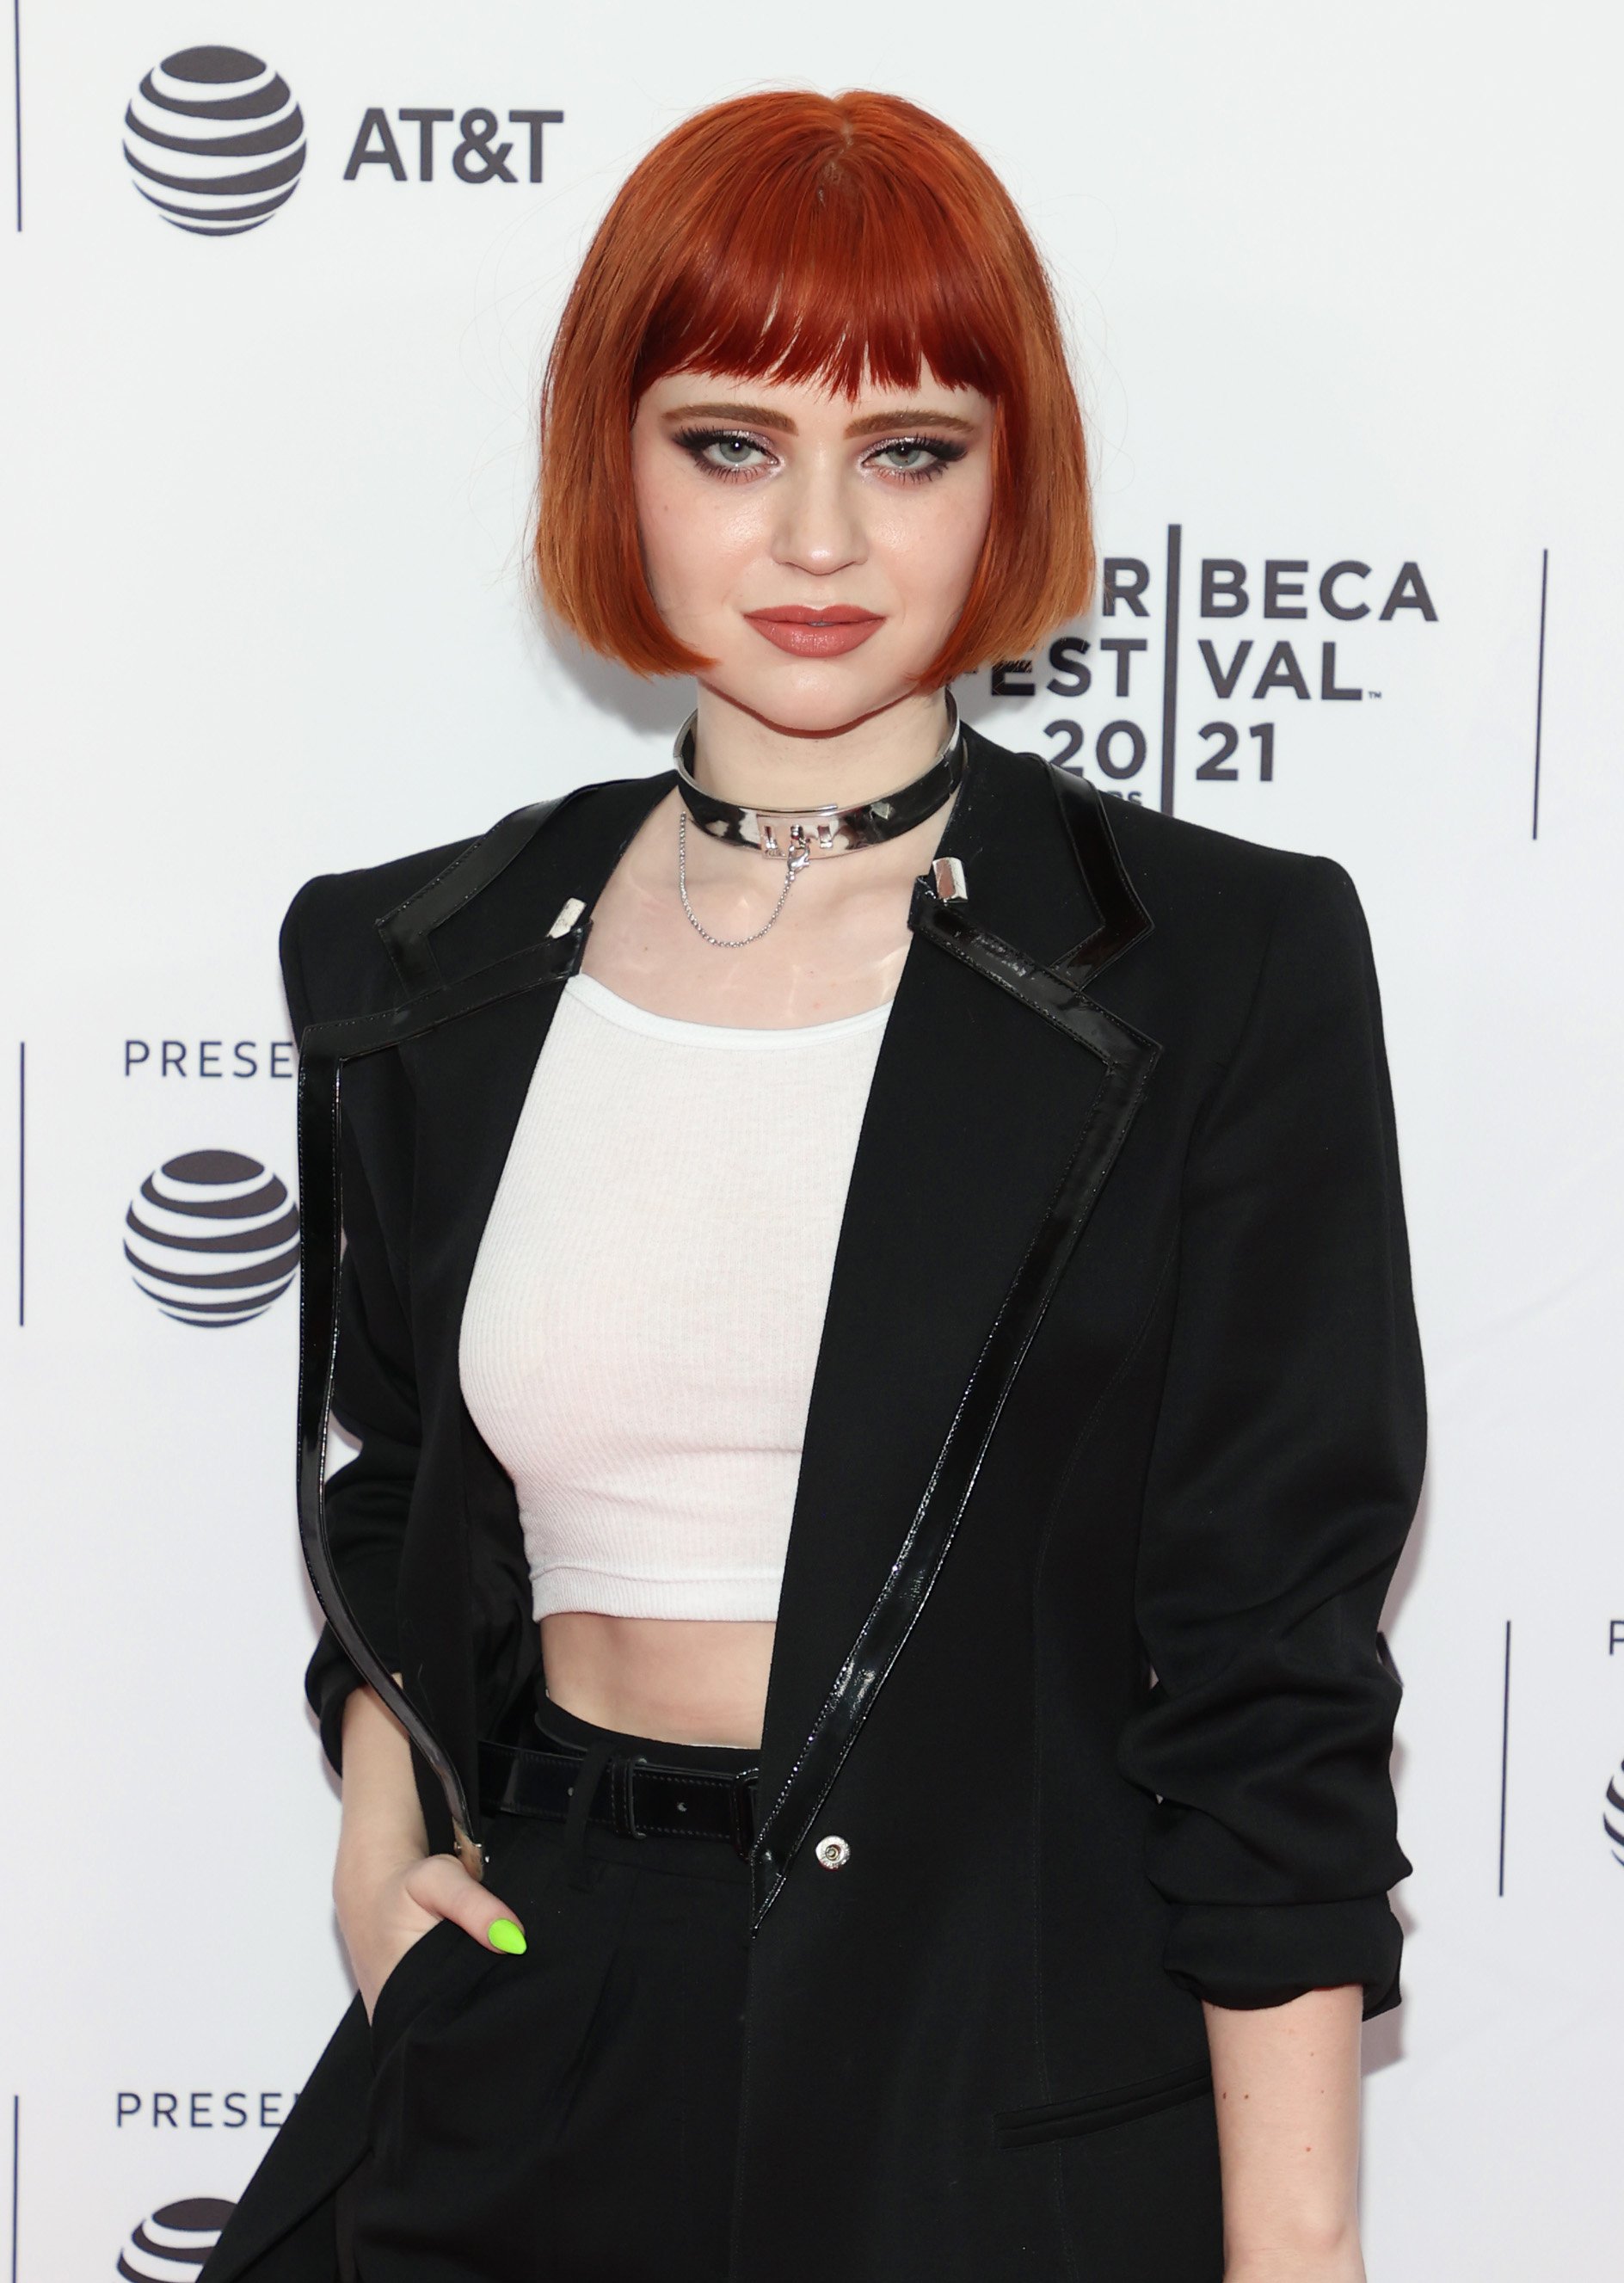 Sierra McCormick from 'American Horror Stories' at the premiere of 'We Need To Do Something' in 2021